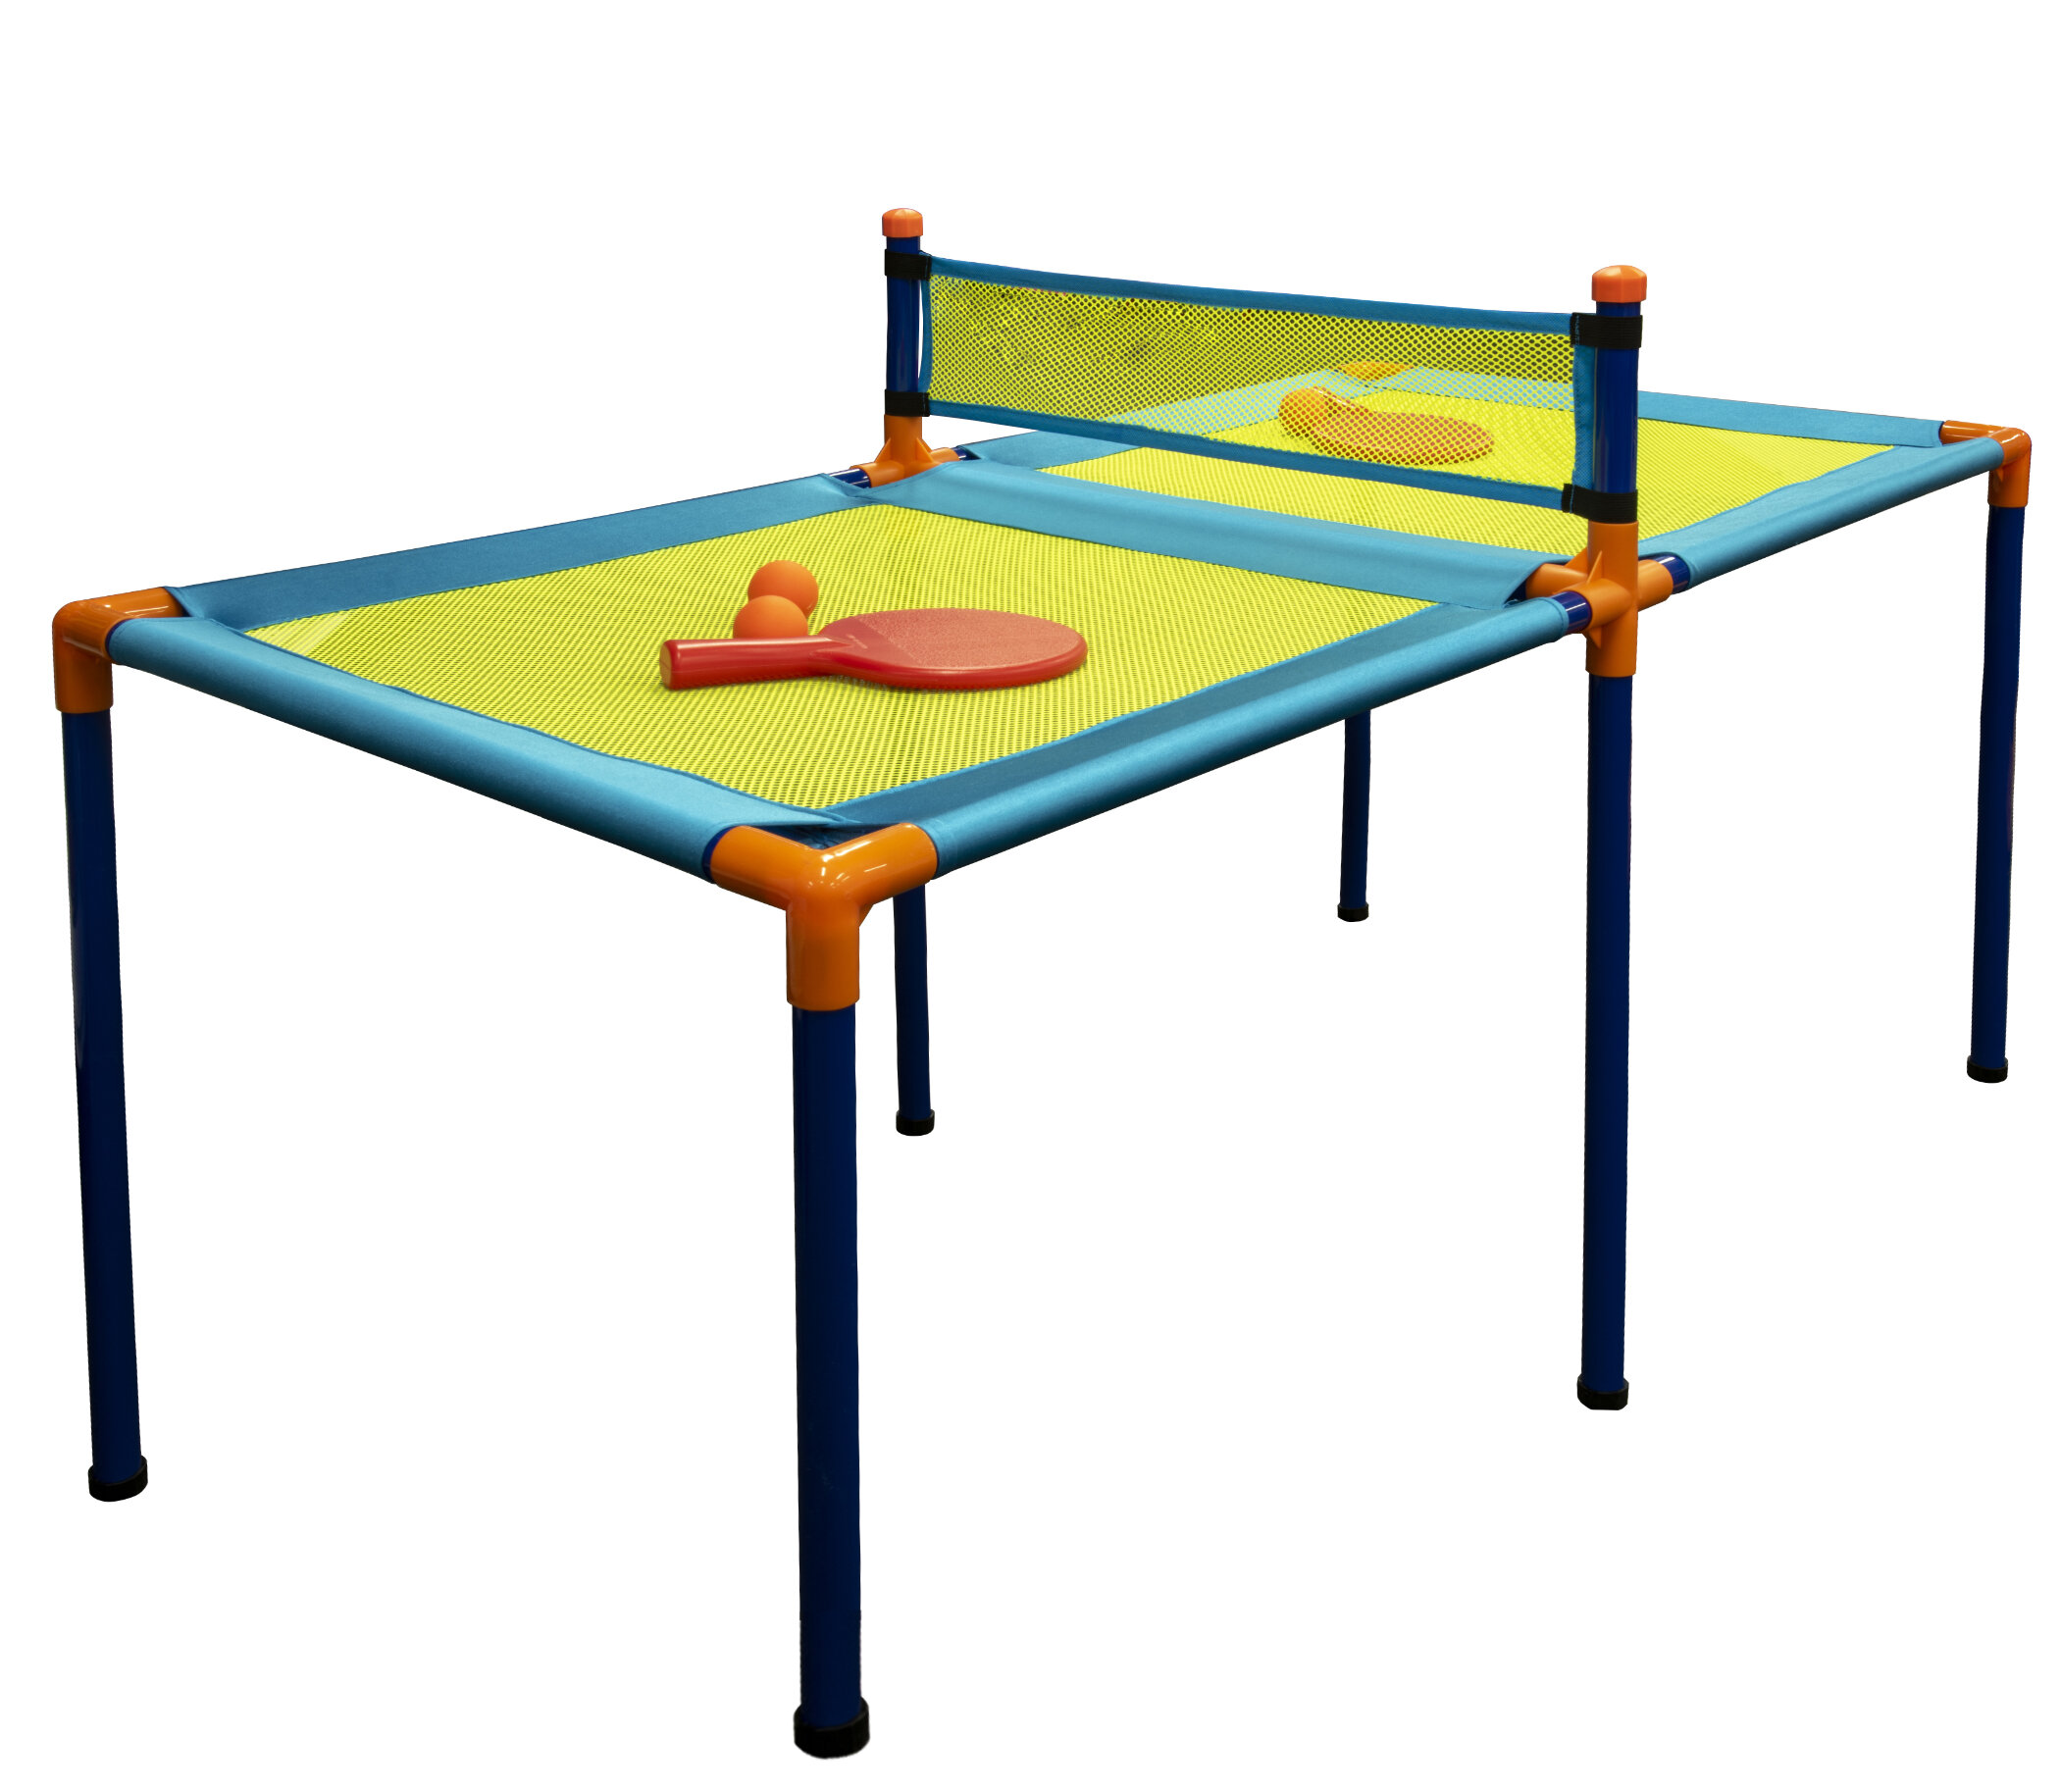 Details about   Portable Table Tennis Game Racket Telescopic Fun Play 